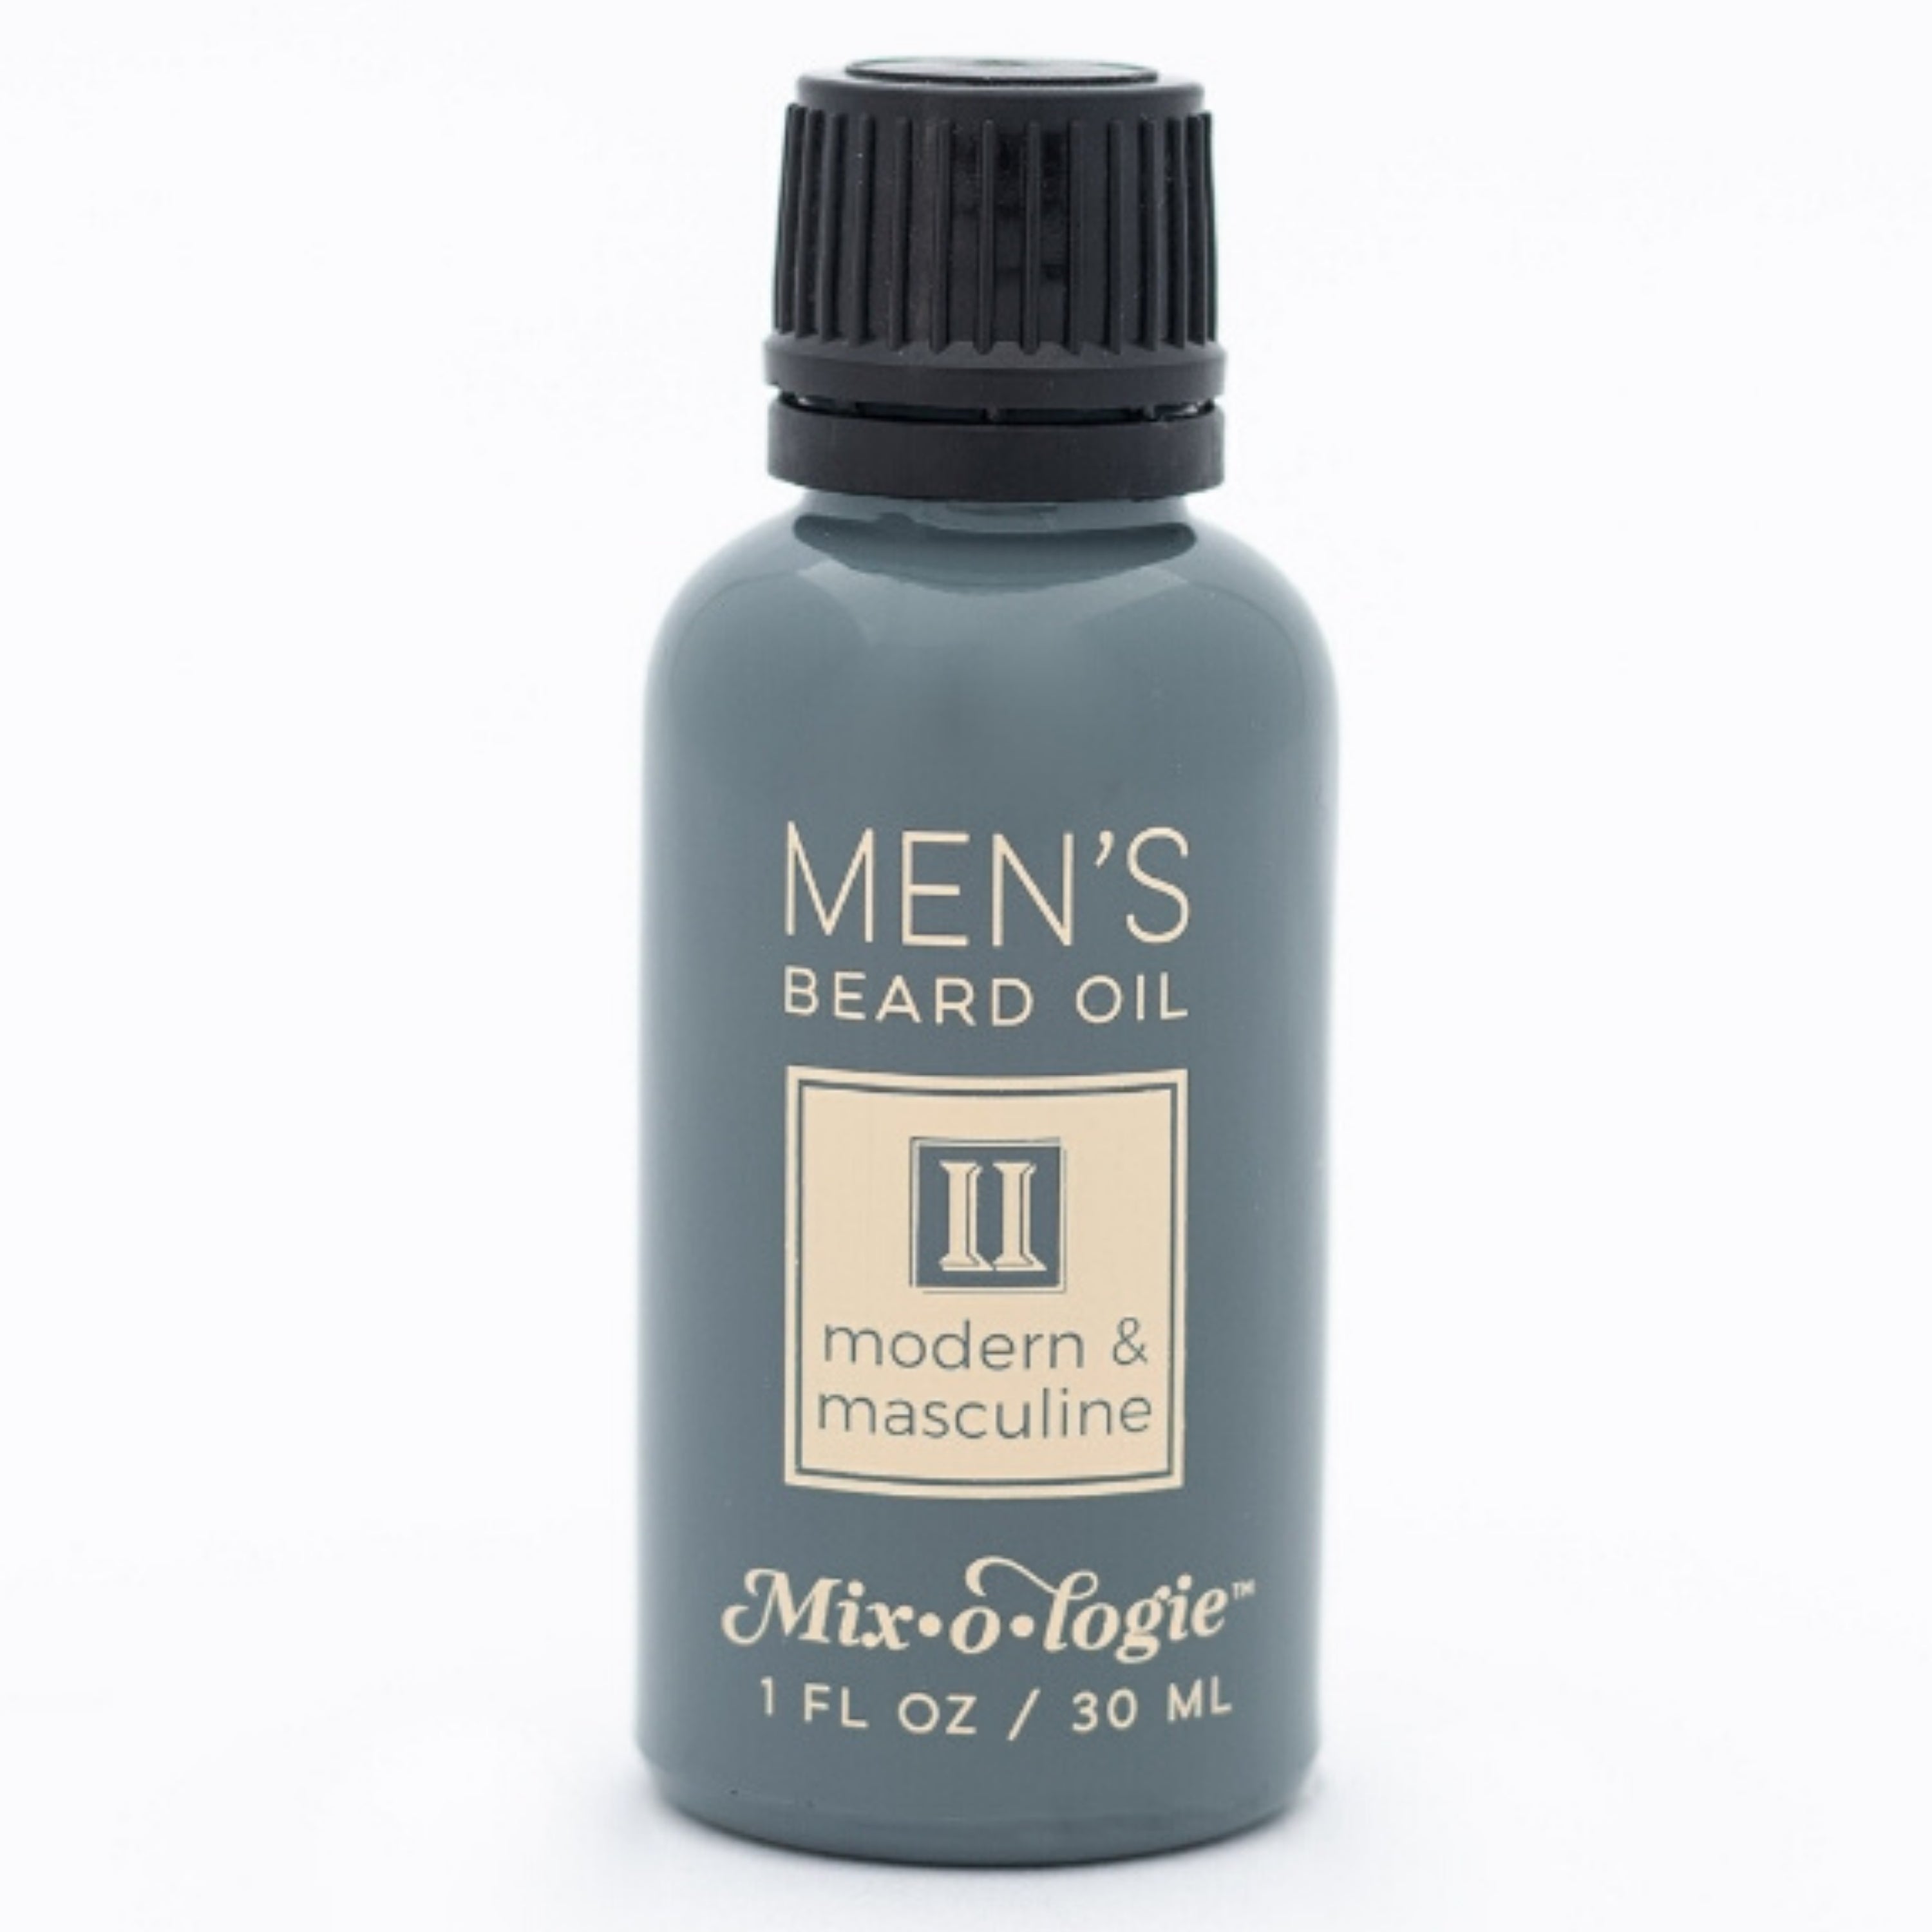 Men’s Beard Oil in Men’s II (Modern & Masculine) in a black and grey tube with yellow accents. 1 fl oz or 30 mL. Pictured on white background.